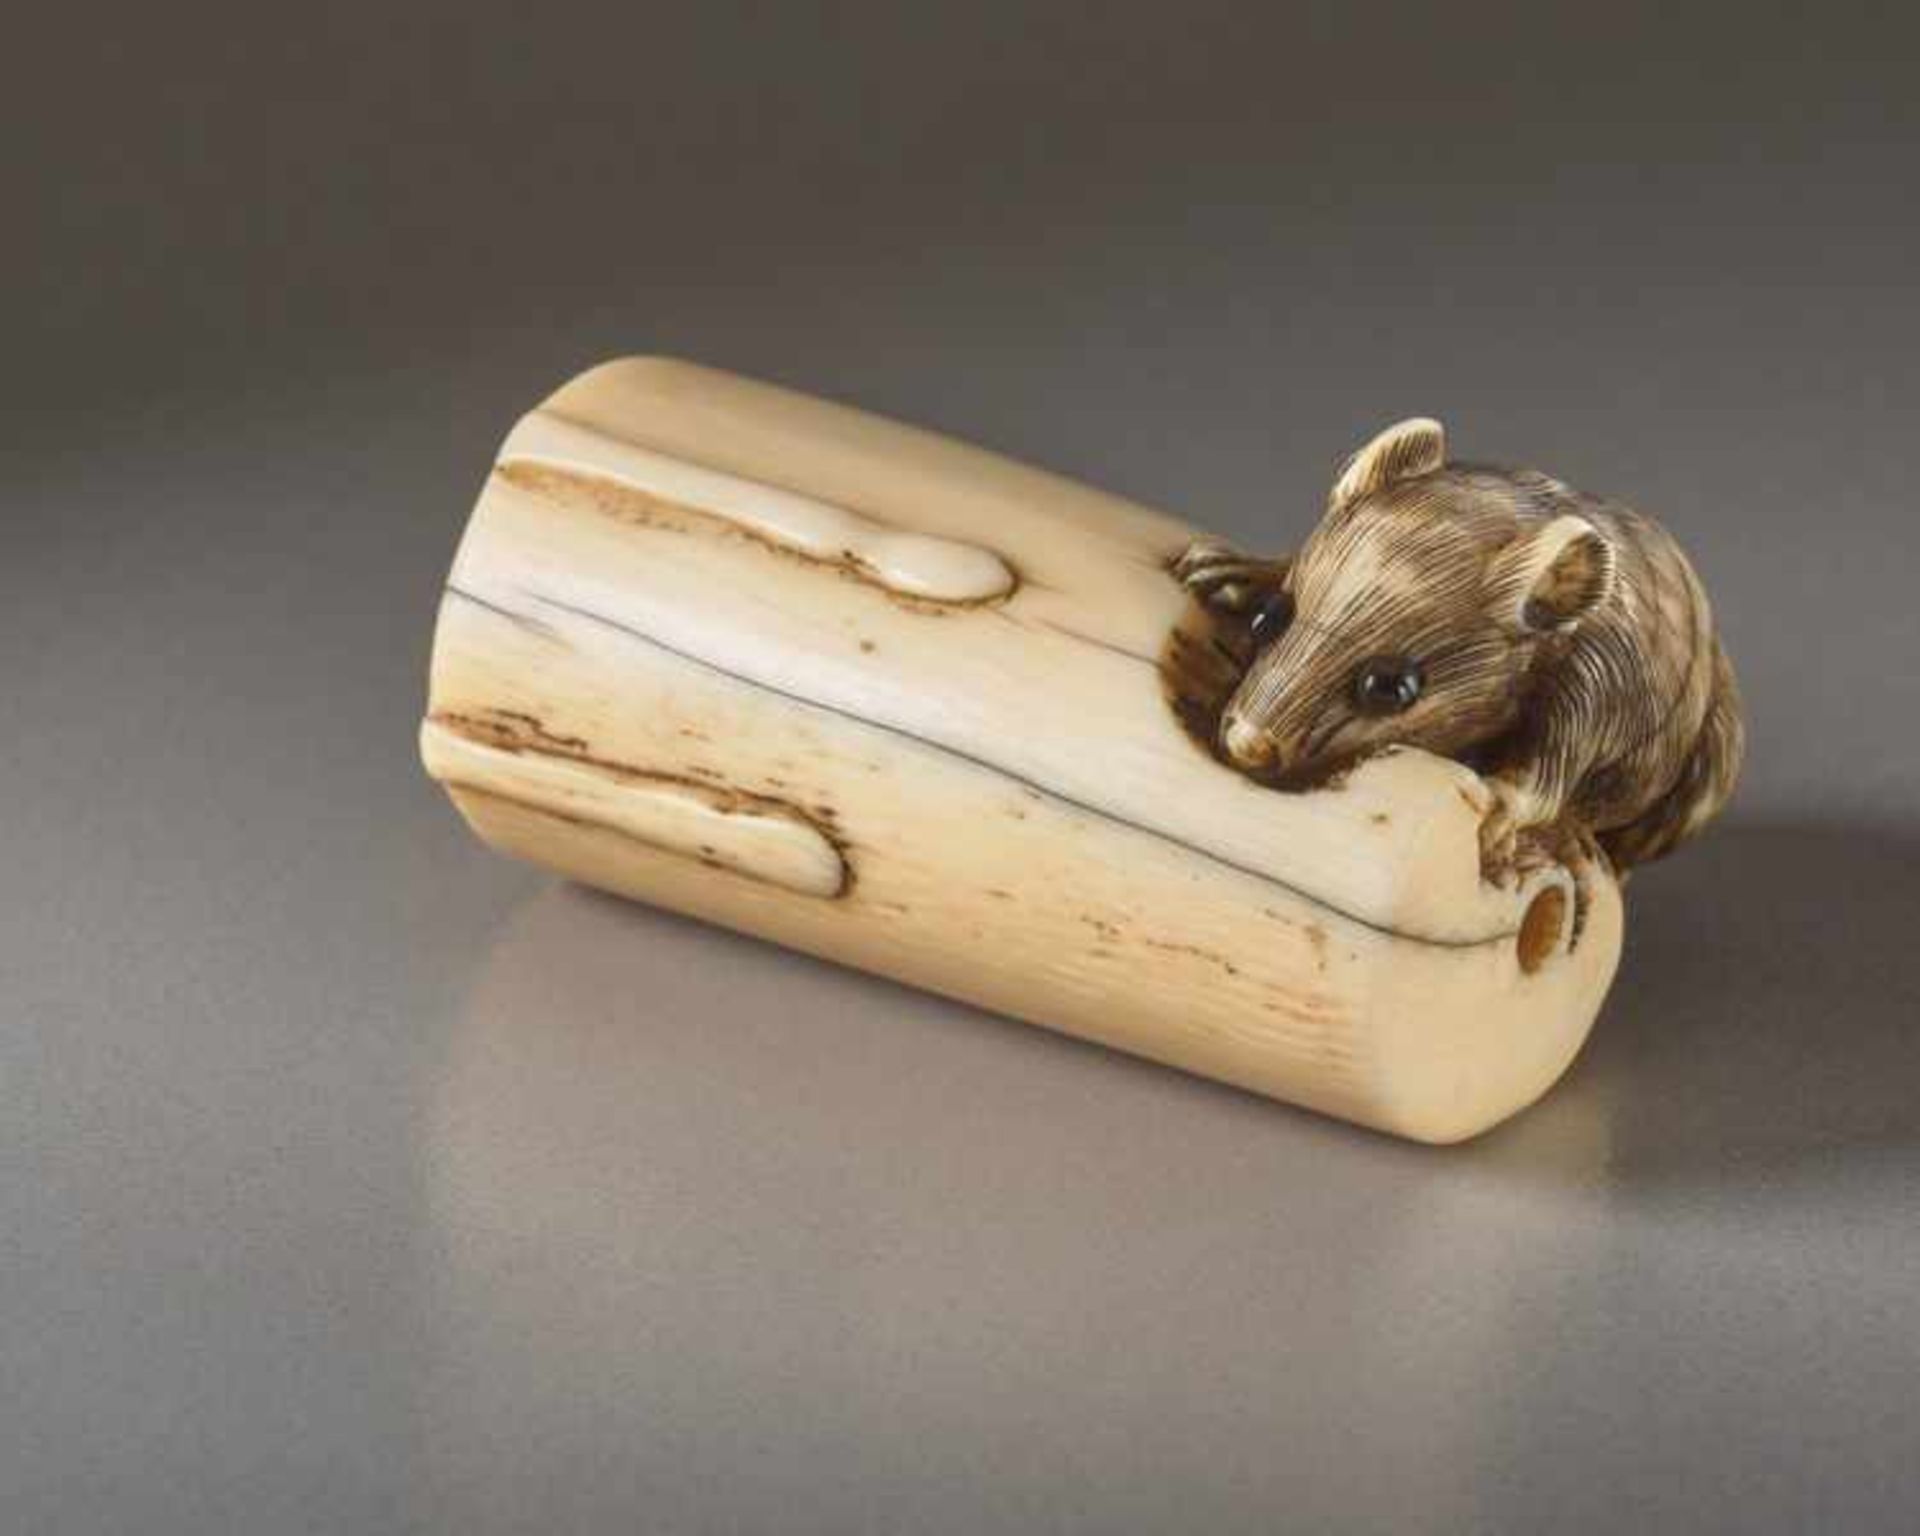 AN IVORY NETSUKE OF A RAT AND CANDLE Ivory netsuke. Japan, 18th or early 19th centuryThe rat, or